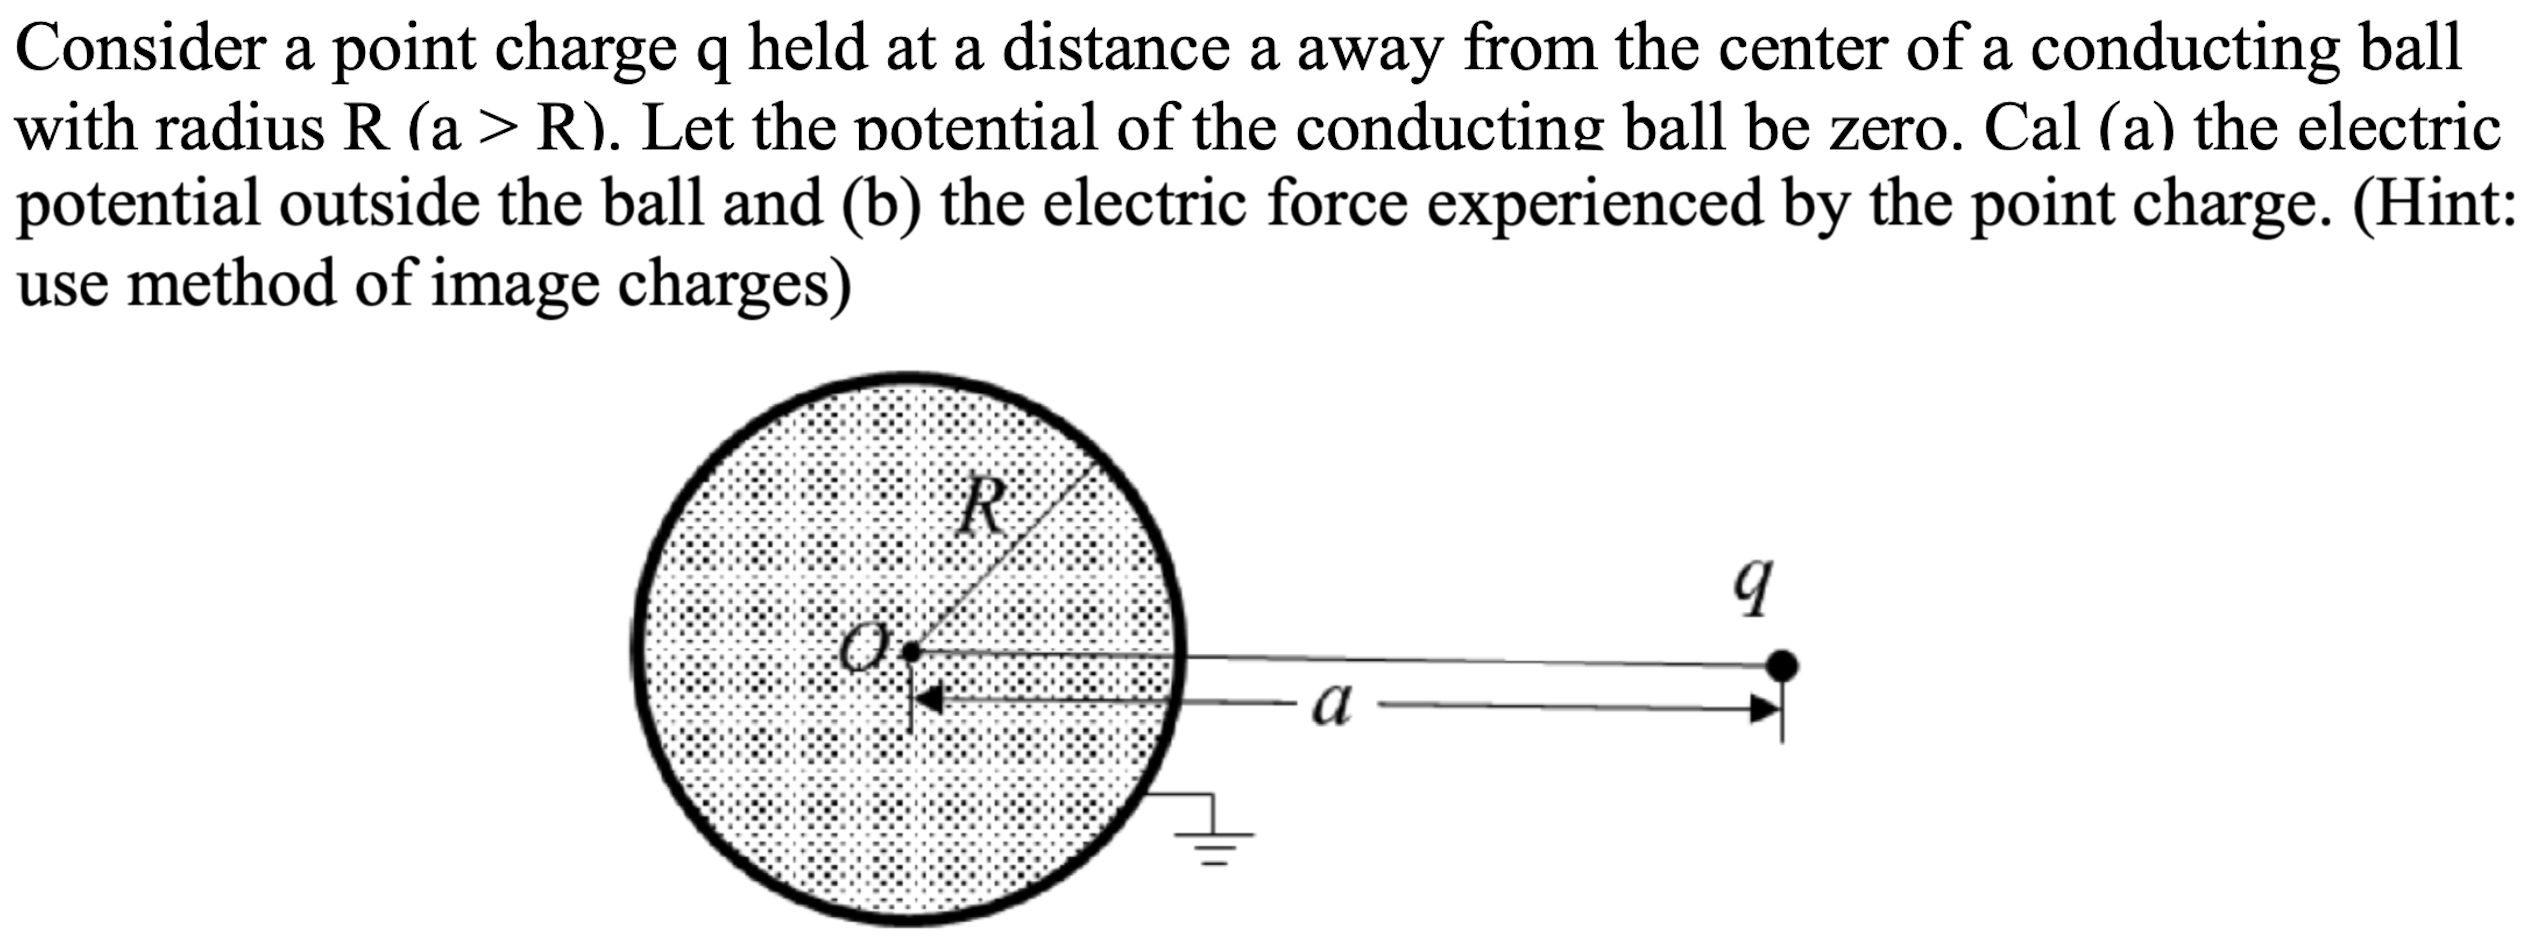 Consider a point charge q held at a distance a away from the center of a conducting ball
with radius R (a > R). Let the potential of the conducting ball be zero. Cal (a) the electric
potential outside the ball and (b) the electric force experienced by the point charge. (Hint:
use method of image charges)
R.
